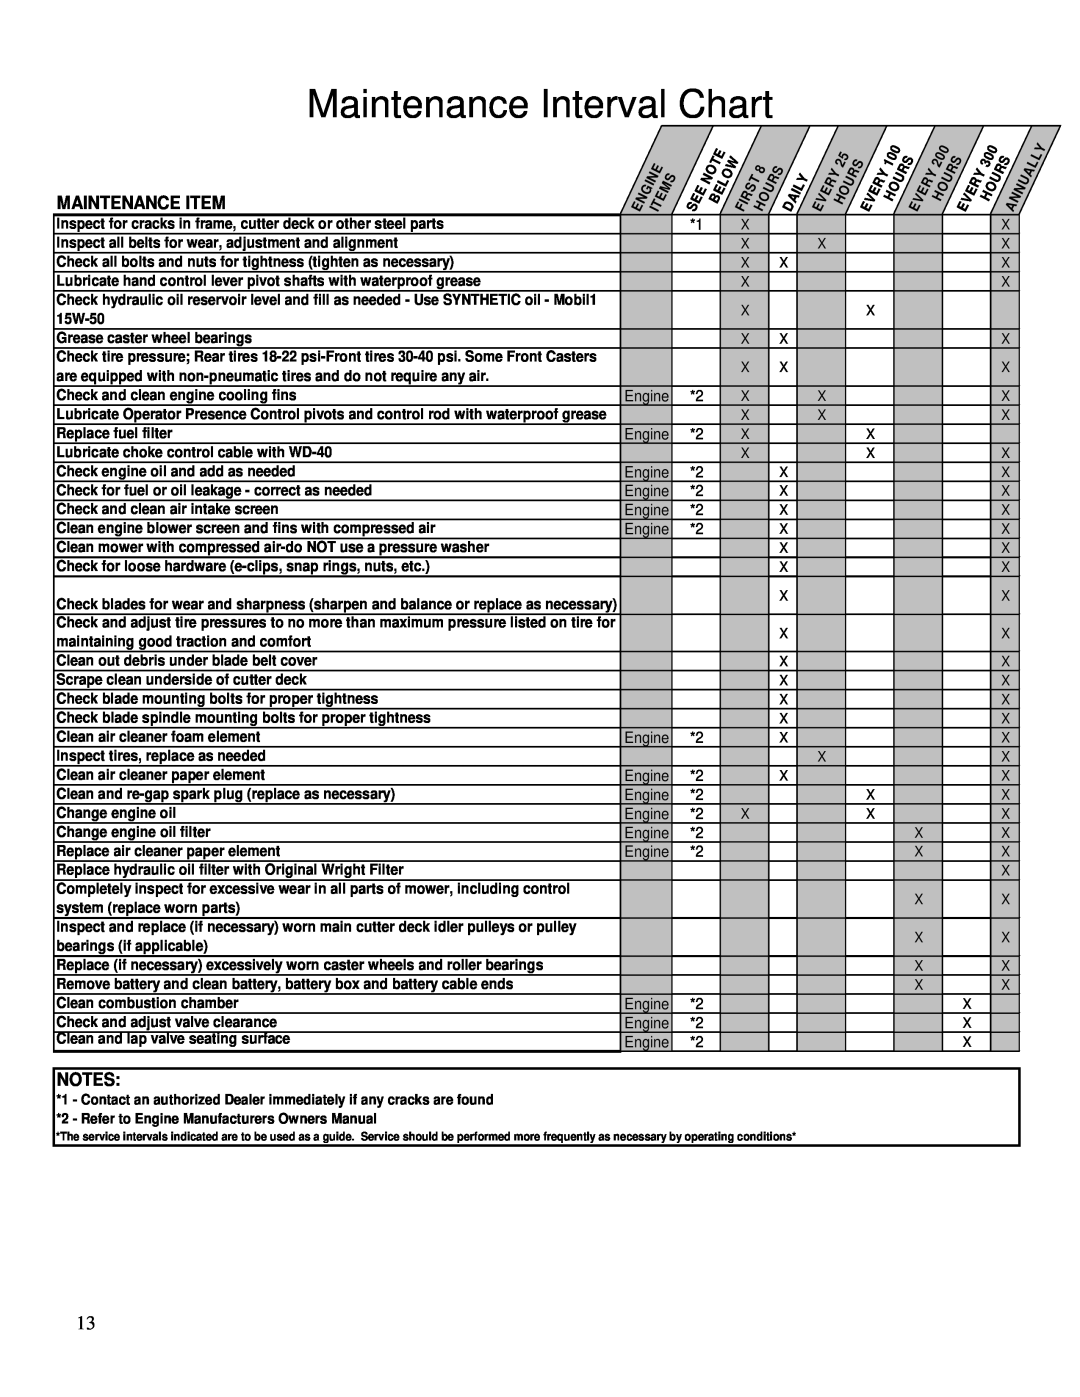 Wright Manufacturing 26980 owner manual Maintenance Interval Chart, Maintenance Item, Notes 